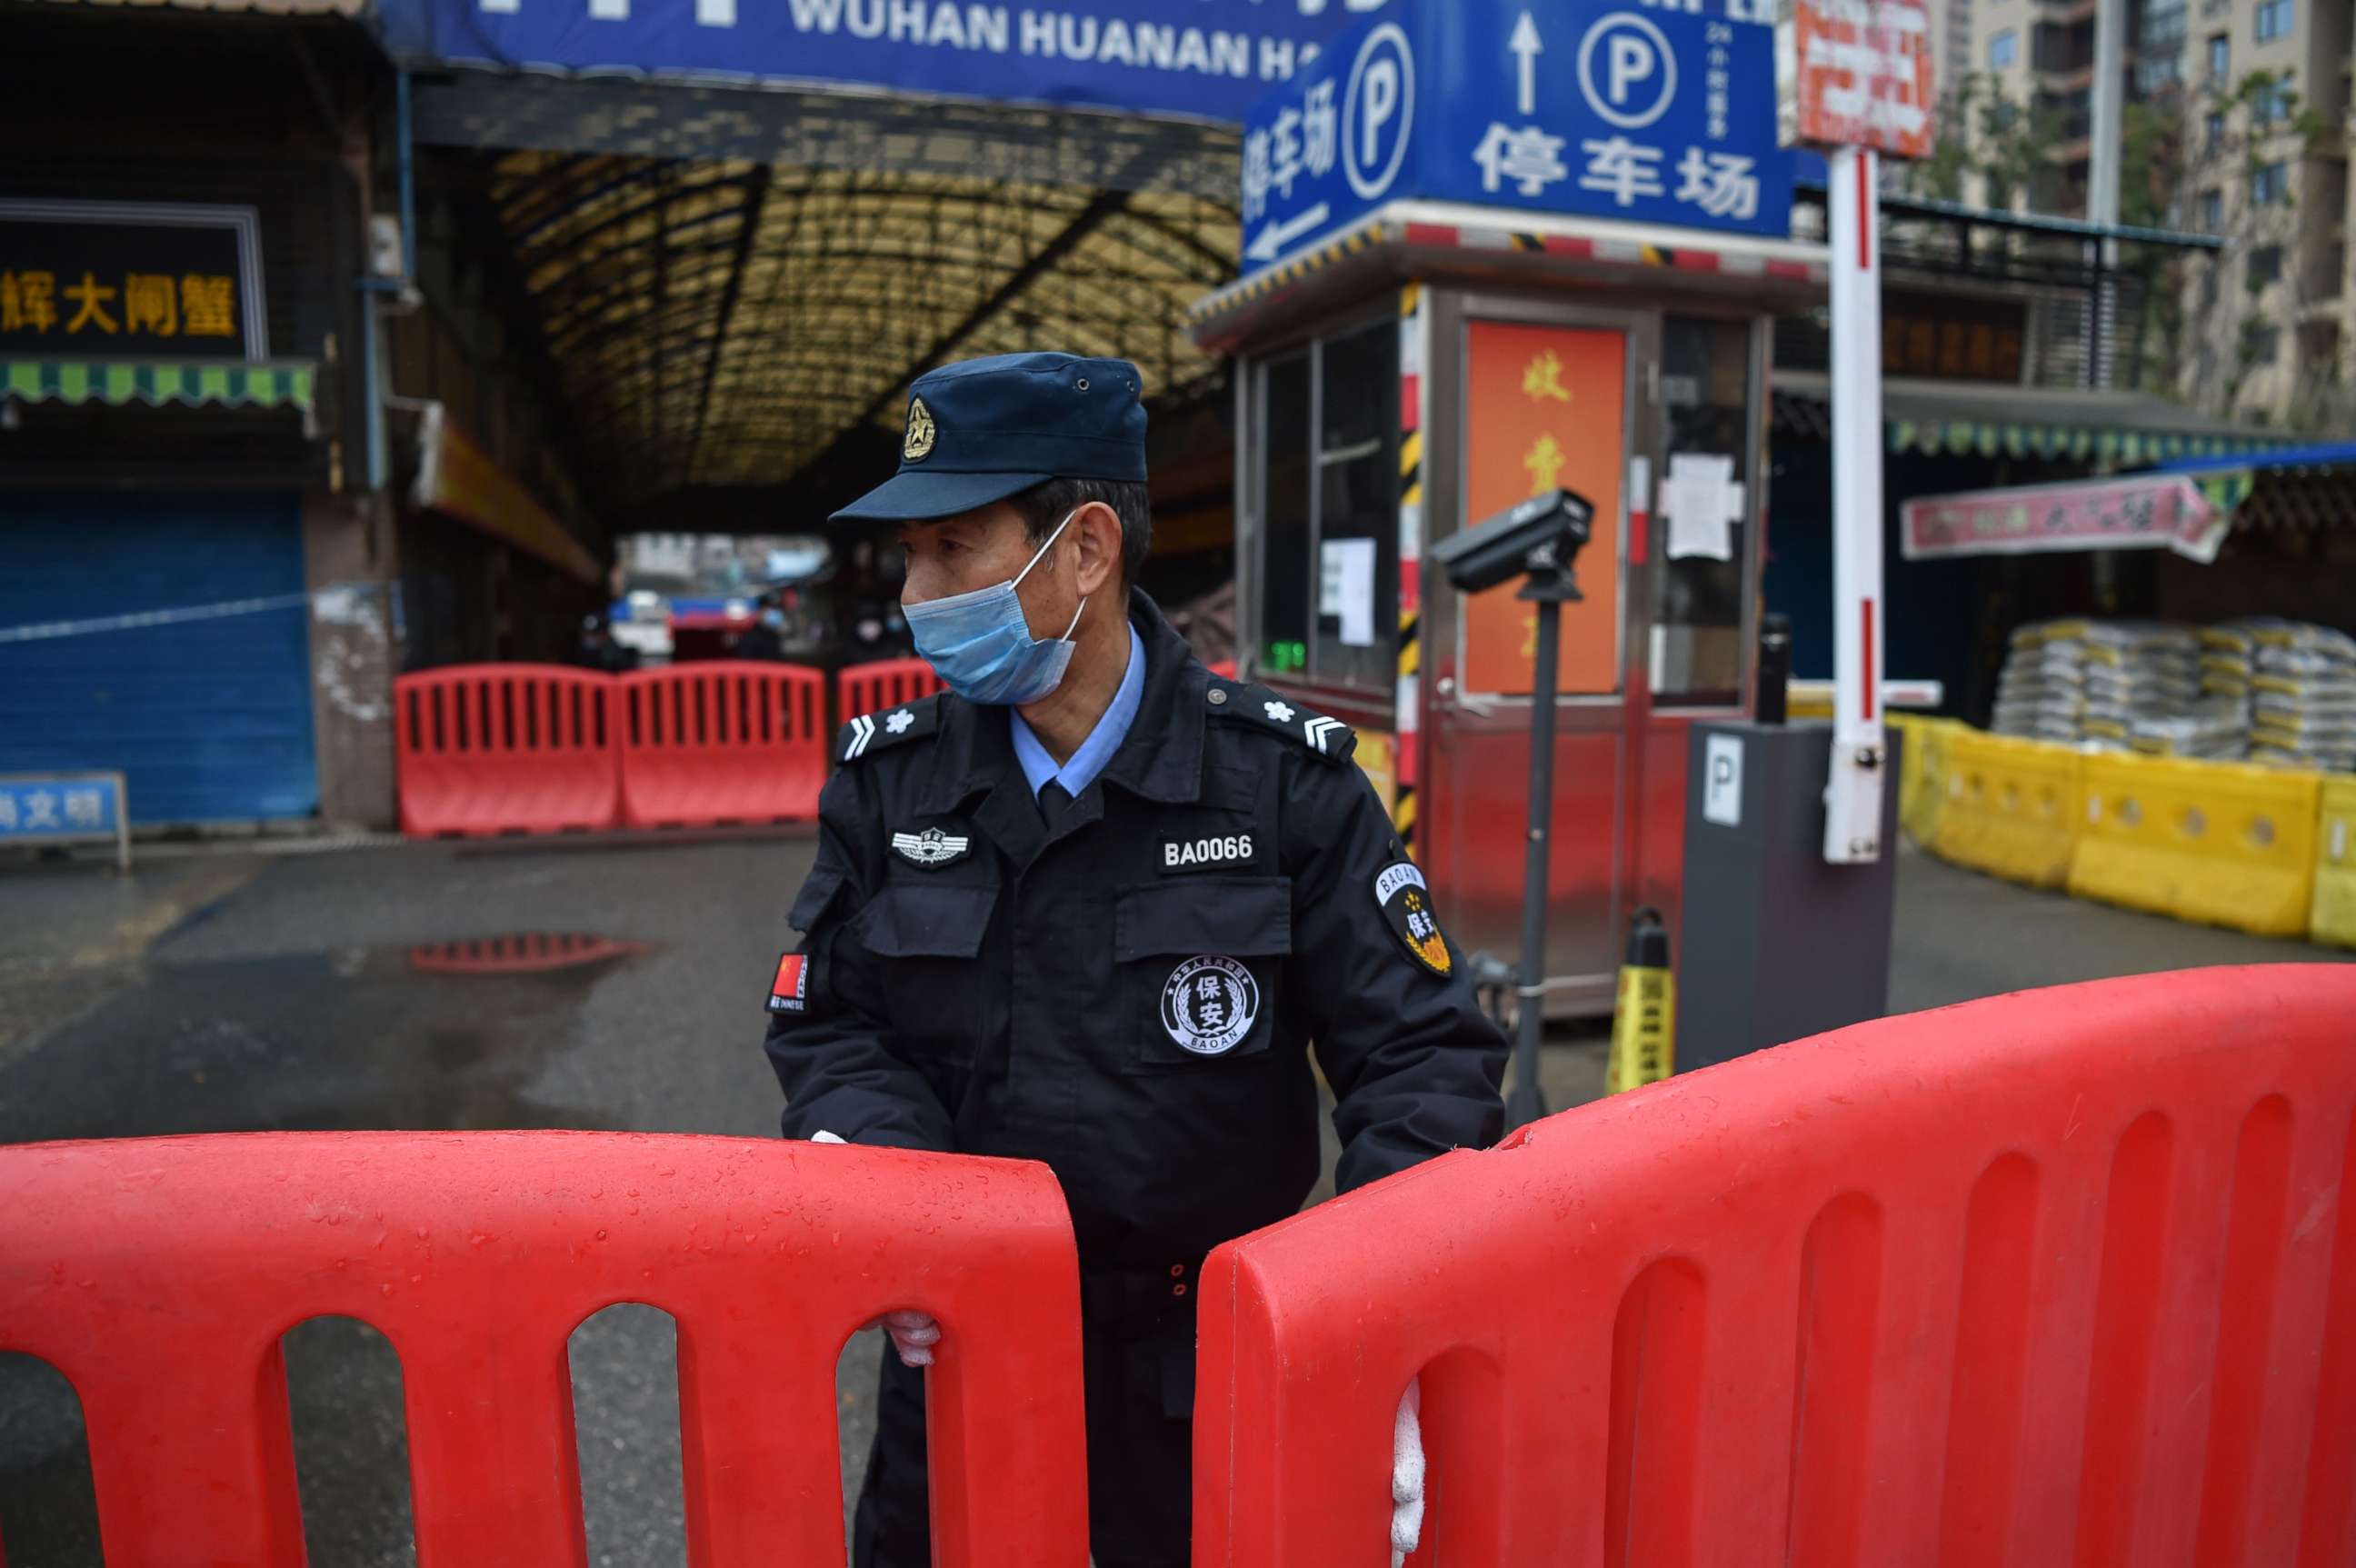 PHOTO: A police officer stands guard outside of Huanan Seafood Wholesale market in Wuhan on Jan. 24, 2020.